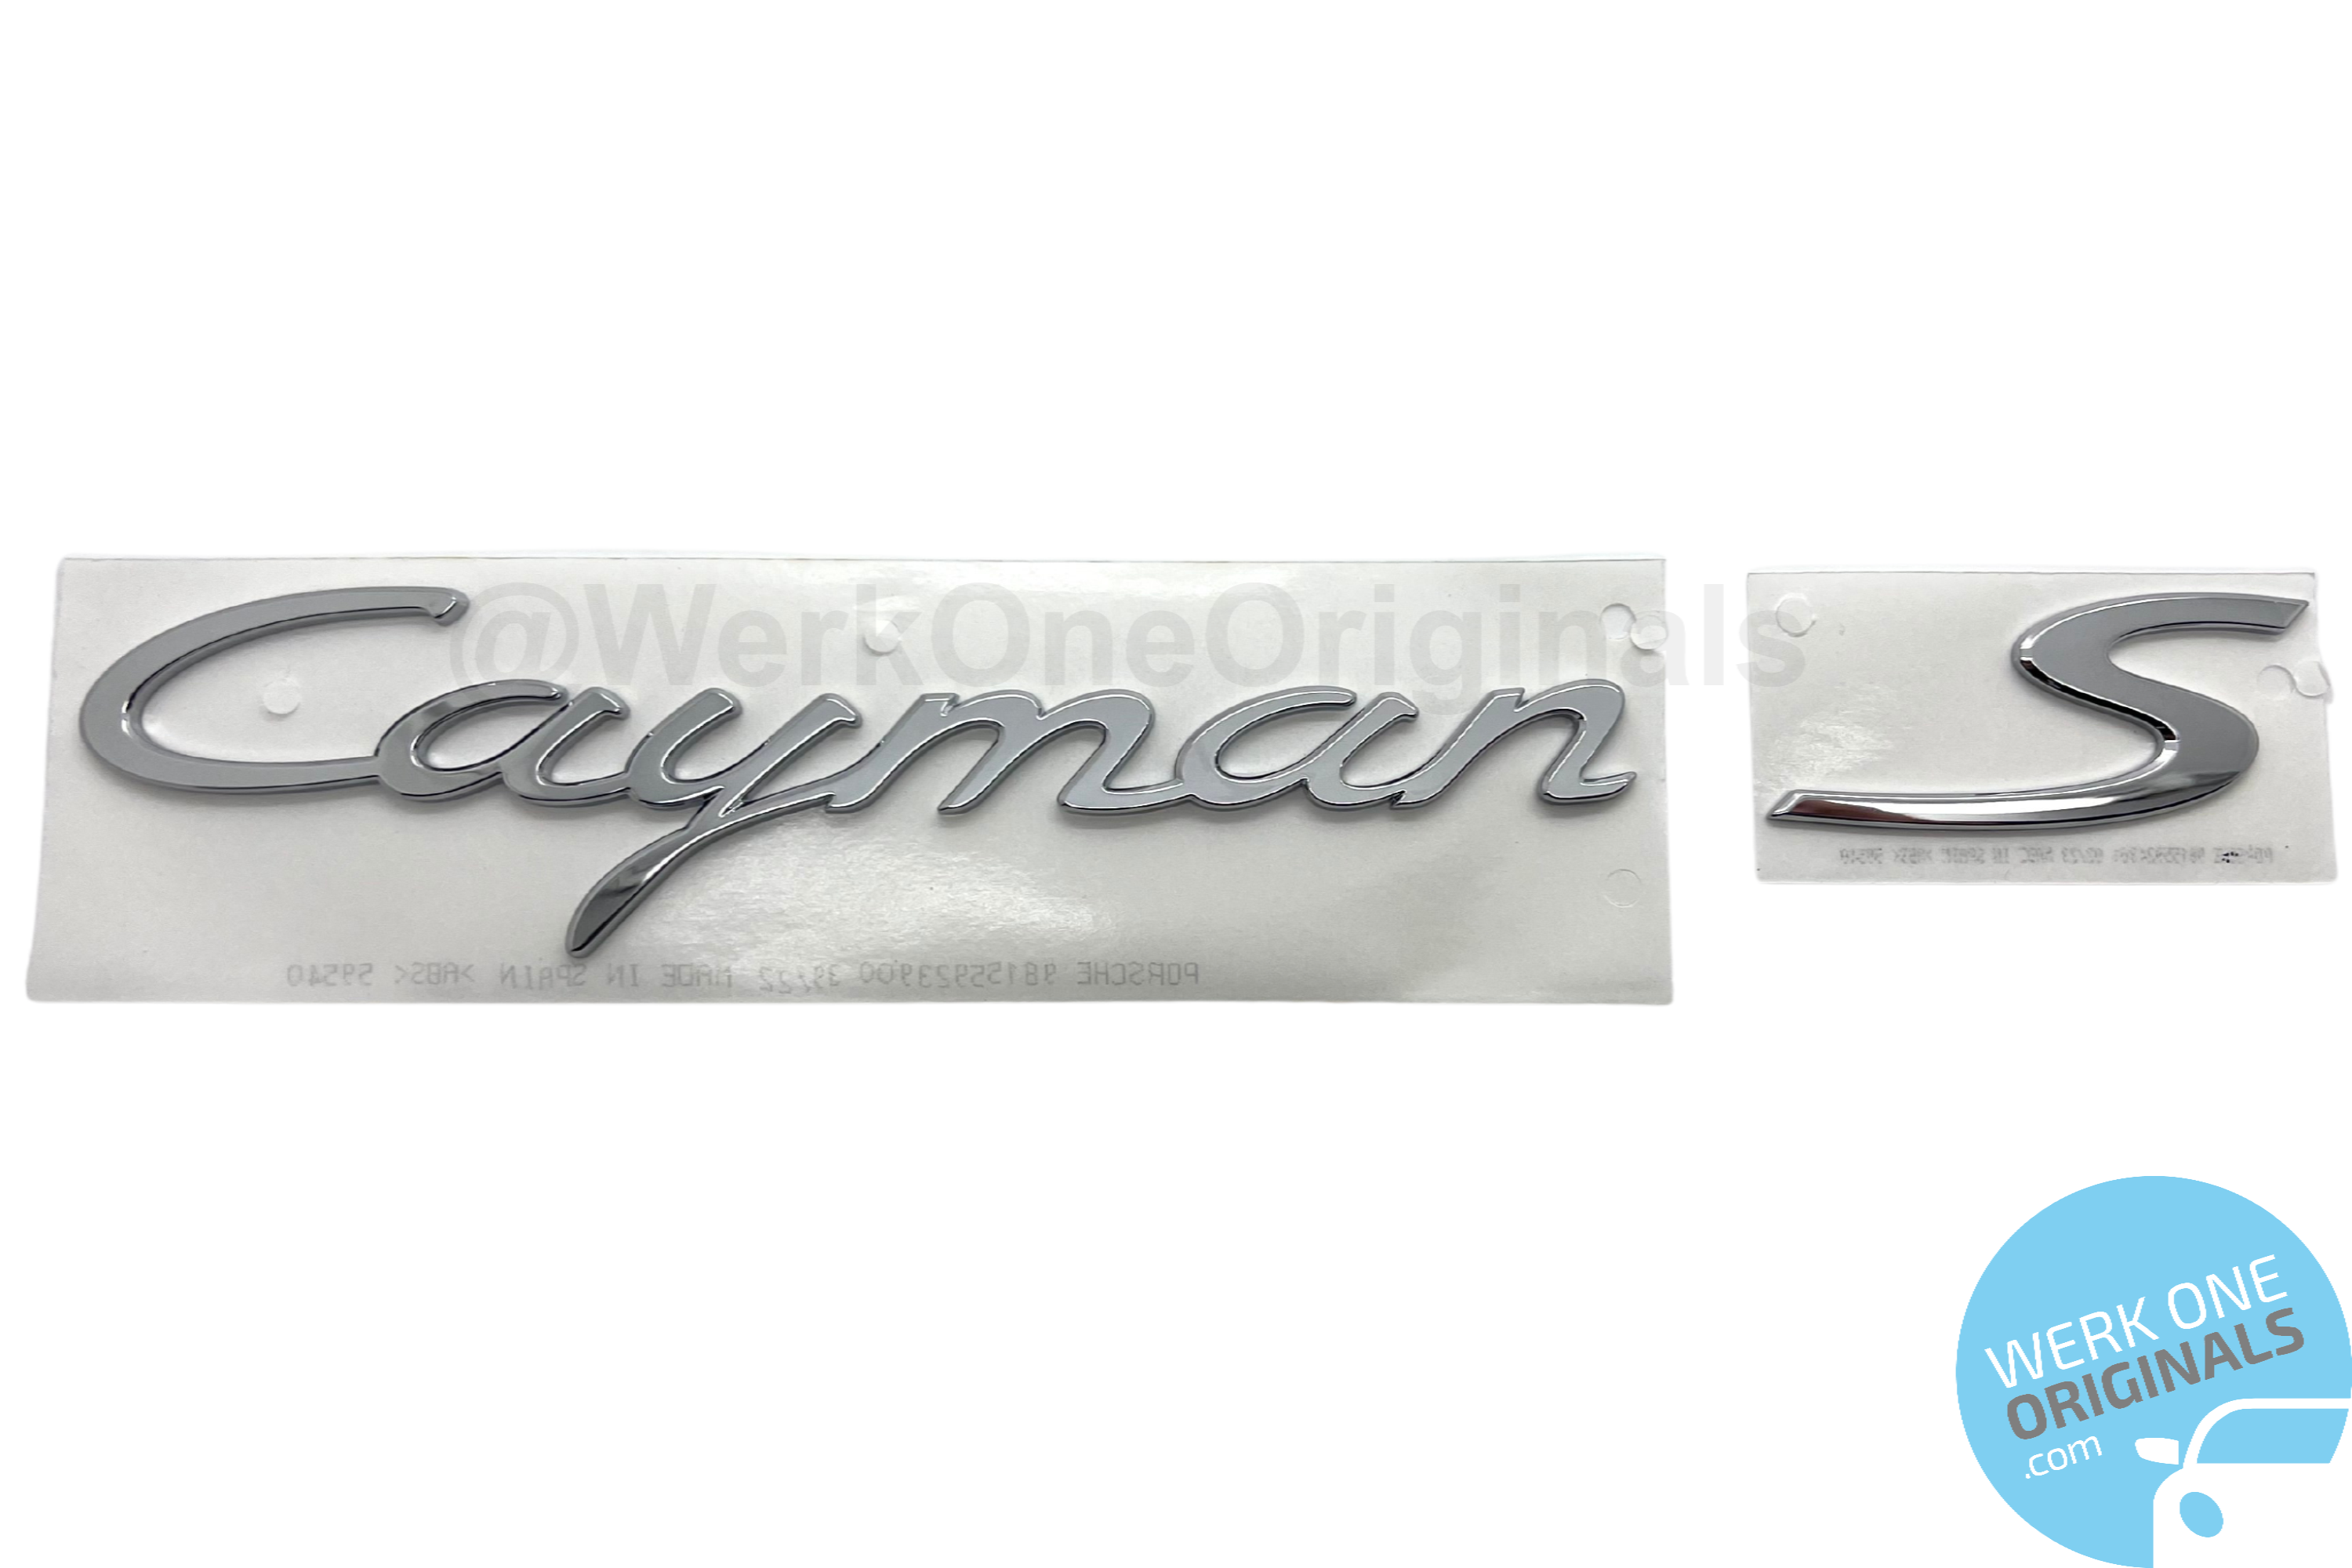 Porsche Official 'Cayman S' Rear Badge Decal in Chrome Silver for Cayman S Type 718 Models